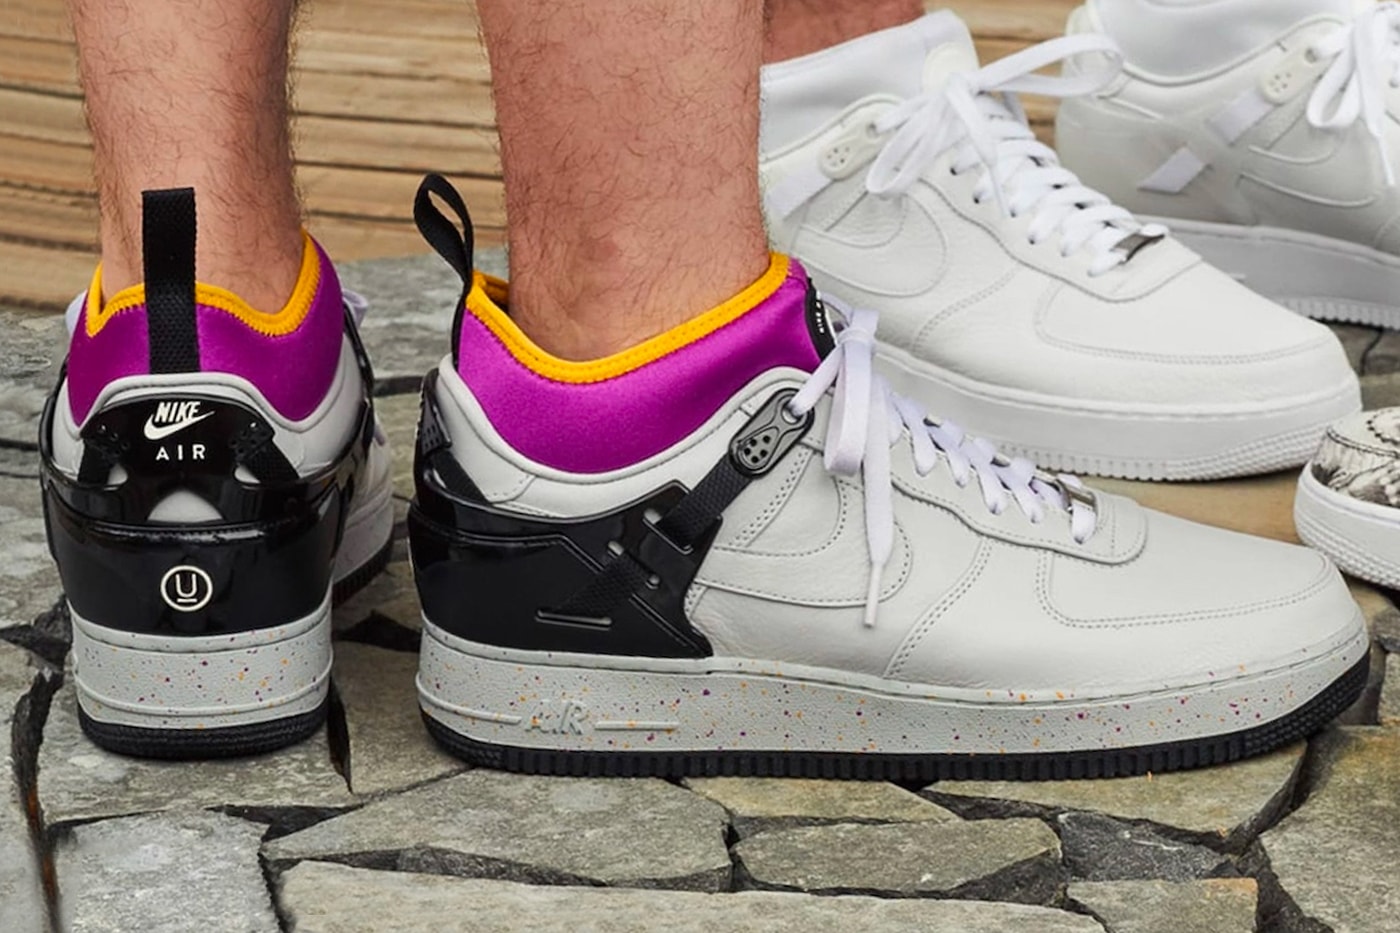 UNDERCOVER Nike Air Force 1 ACG Air Revaderchi Closer Look Info Release Date Jun Takahashi Spring Summer 2022 Collection